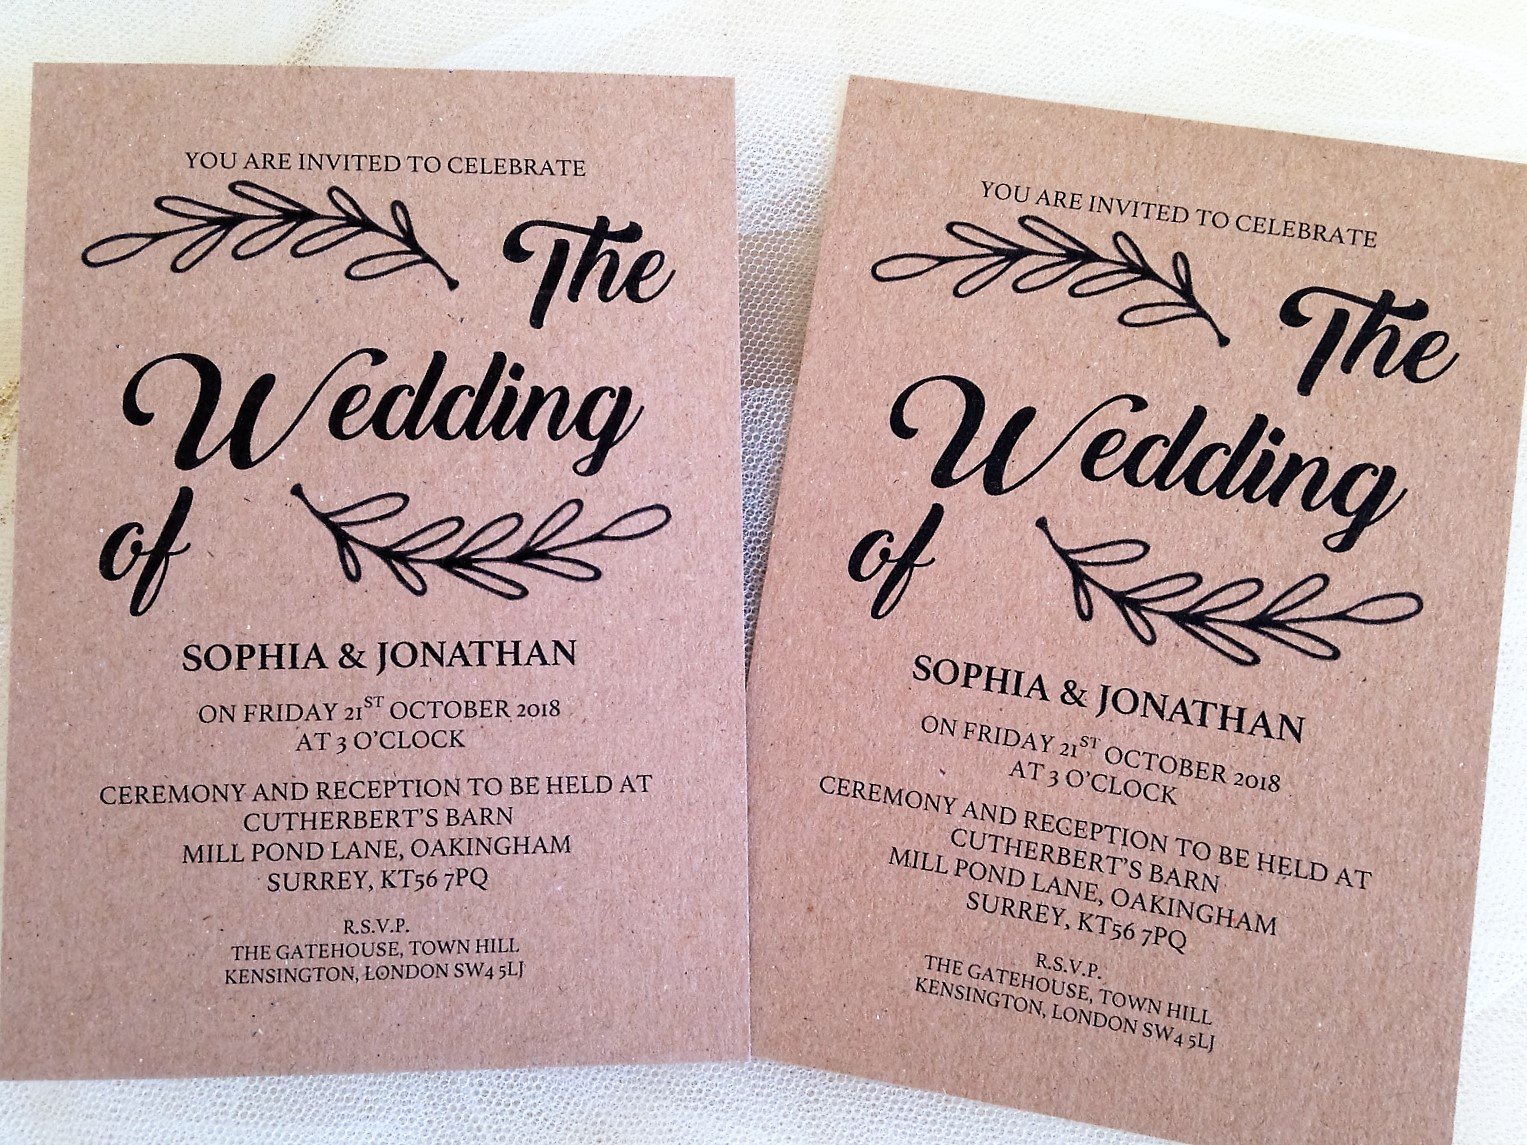 Wedding invitations  what to include